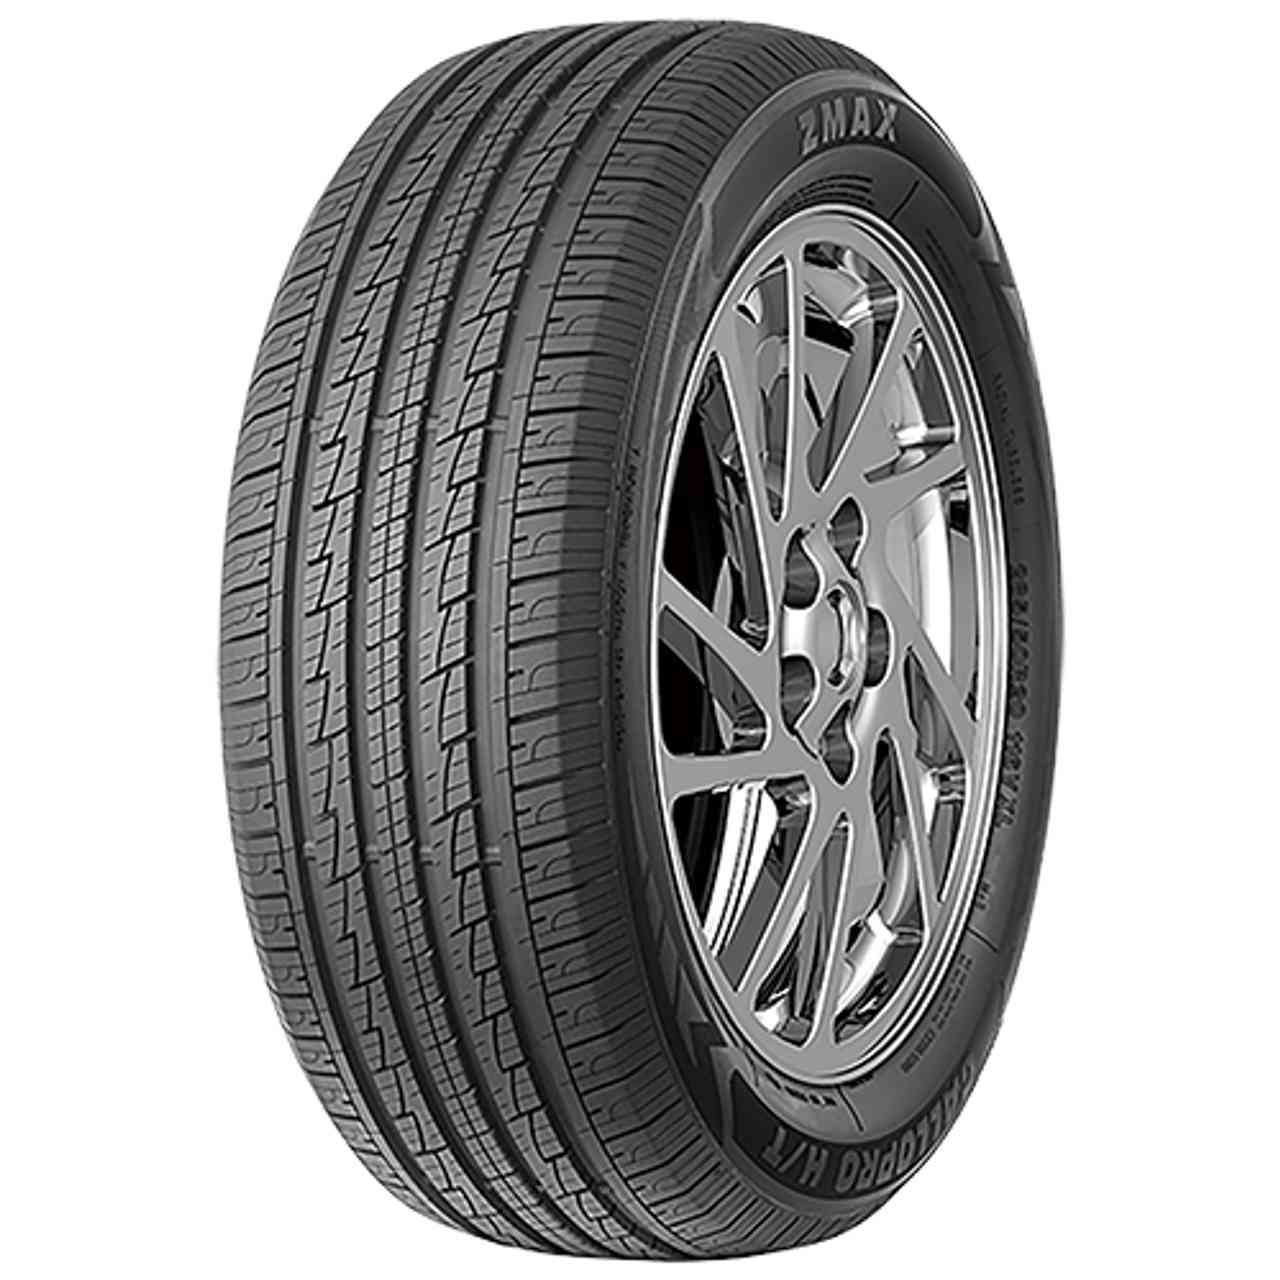 ZMAX GALLOPRO H/T 225/60R18 104H BSW